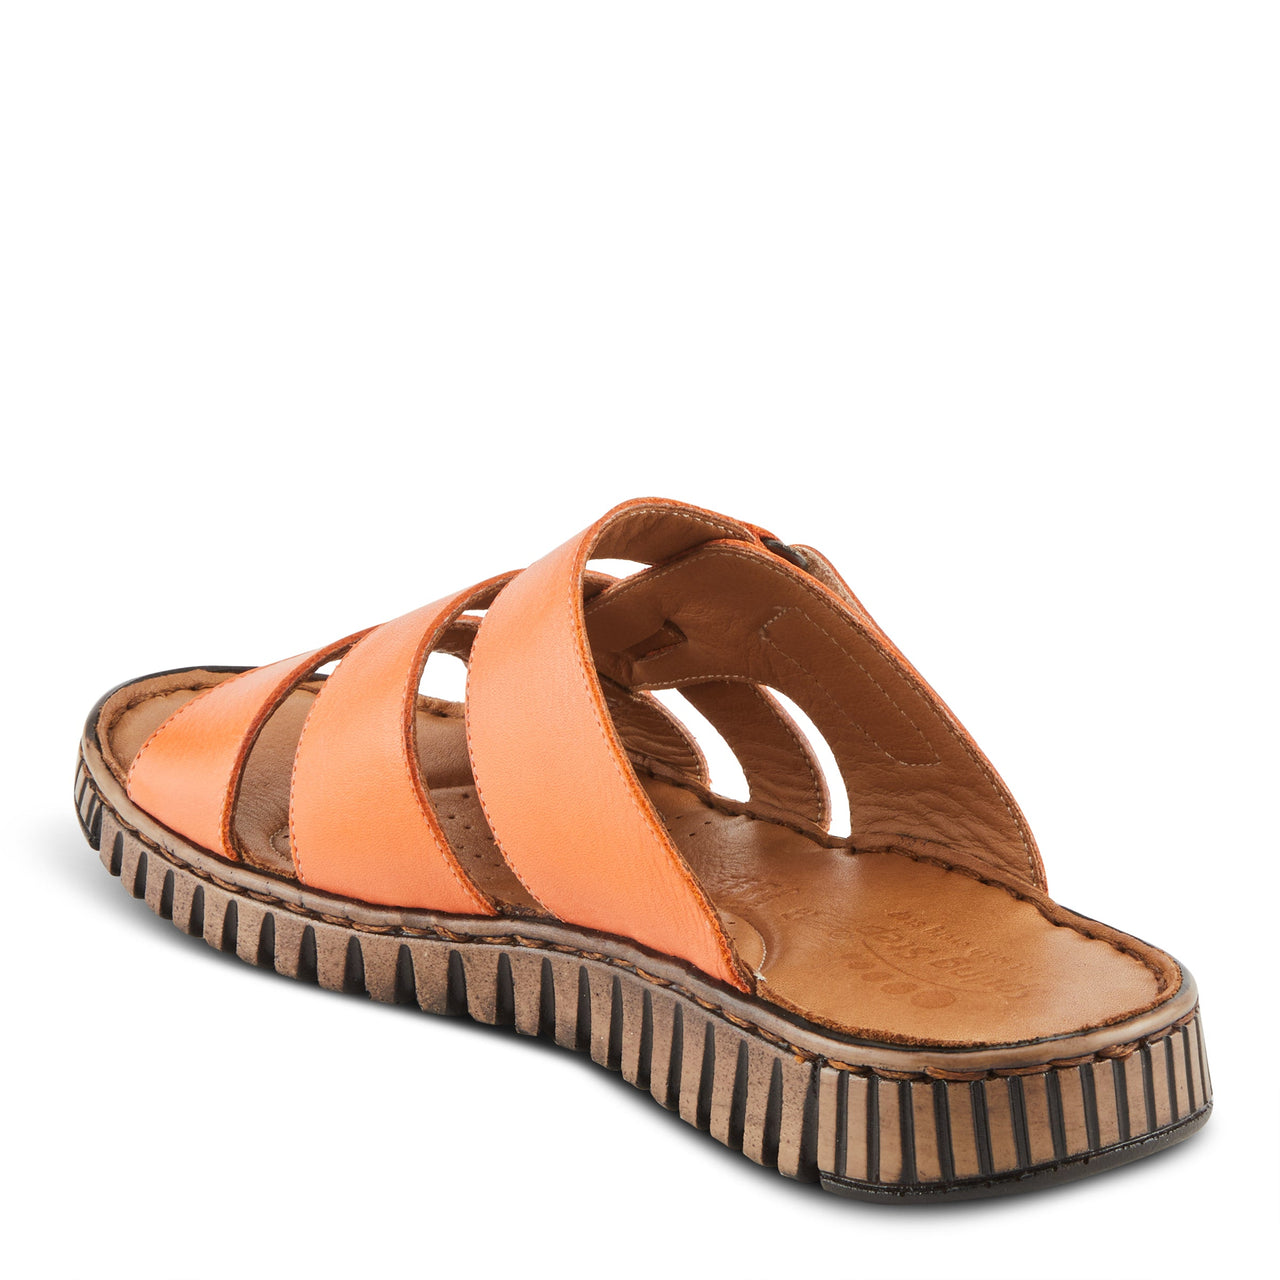 Brown leather Spring Step Olly Sandals with floral embellishments and cushioned insoles for maximum comfort and support